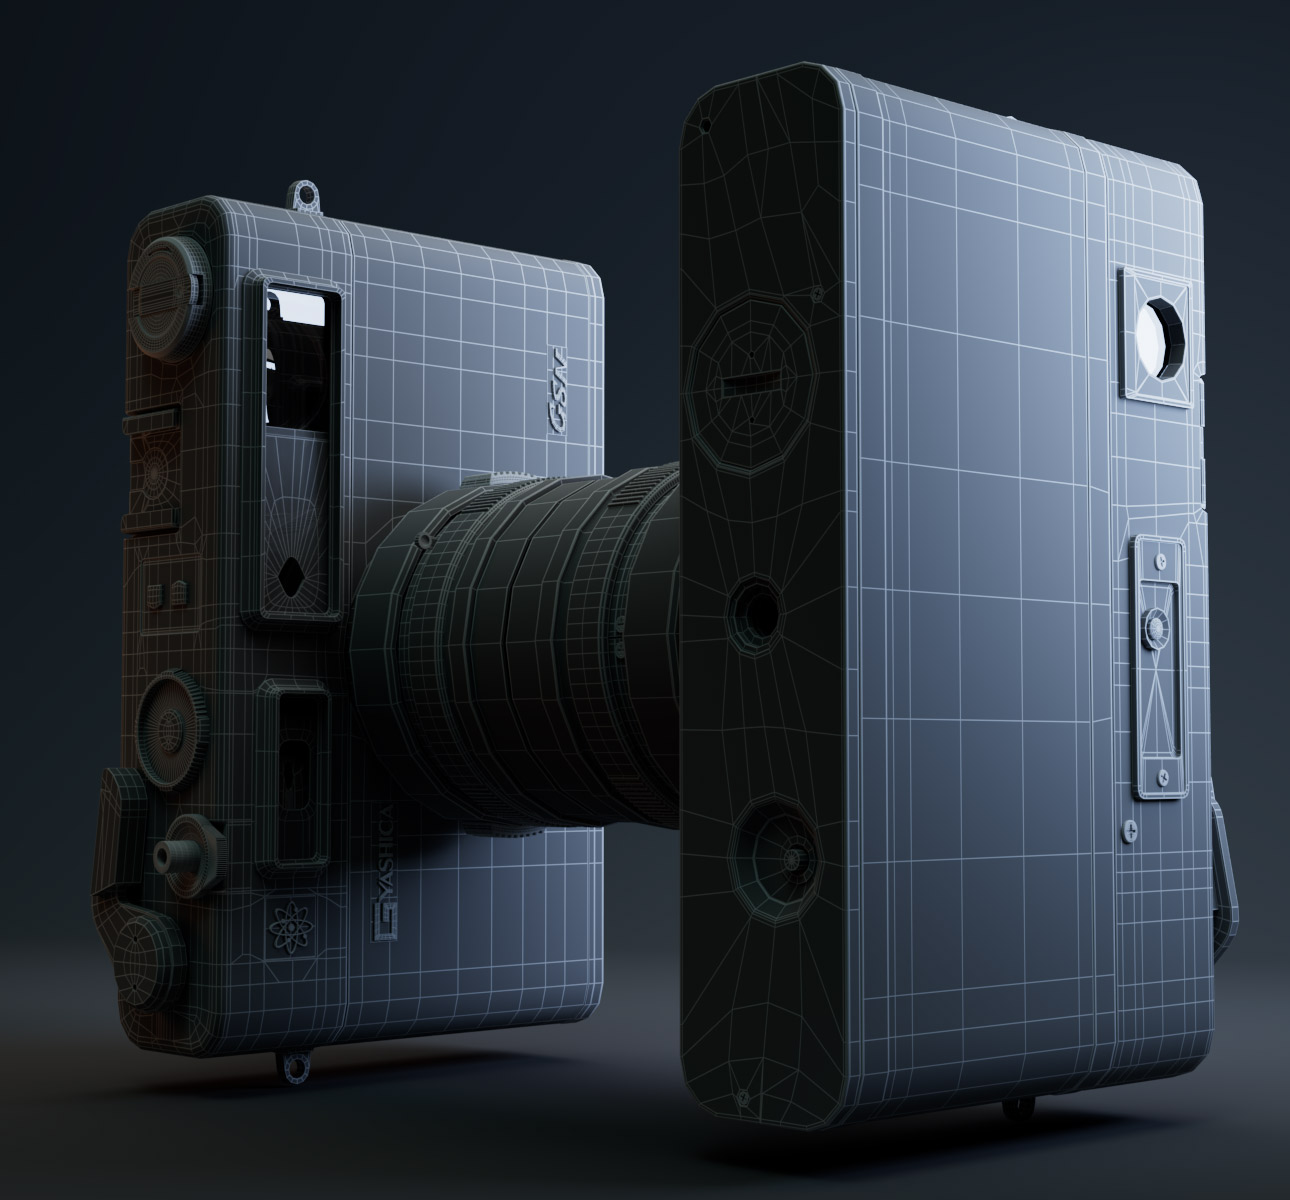 Portfolio - 3D Modeling of a Yashica Camera - Lighting Rendering in Arnold - Wireframe C